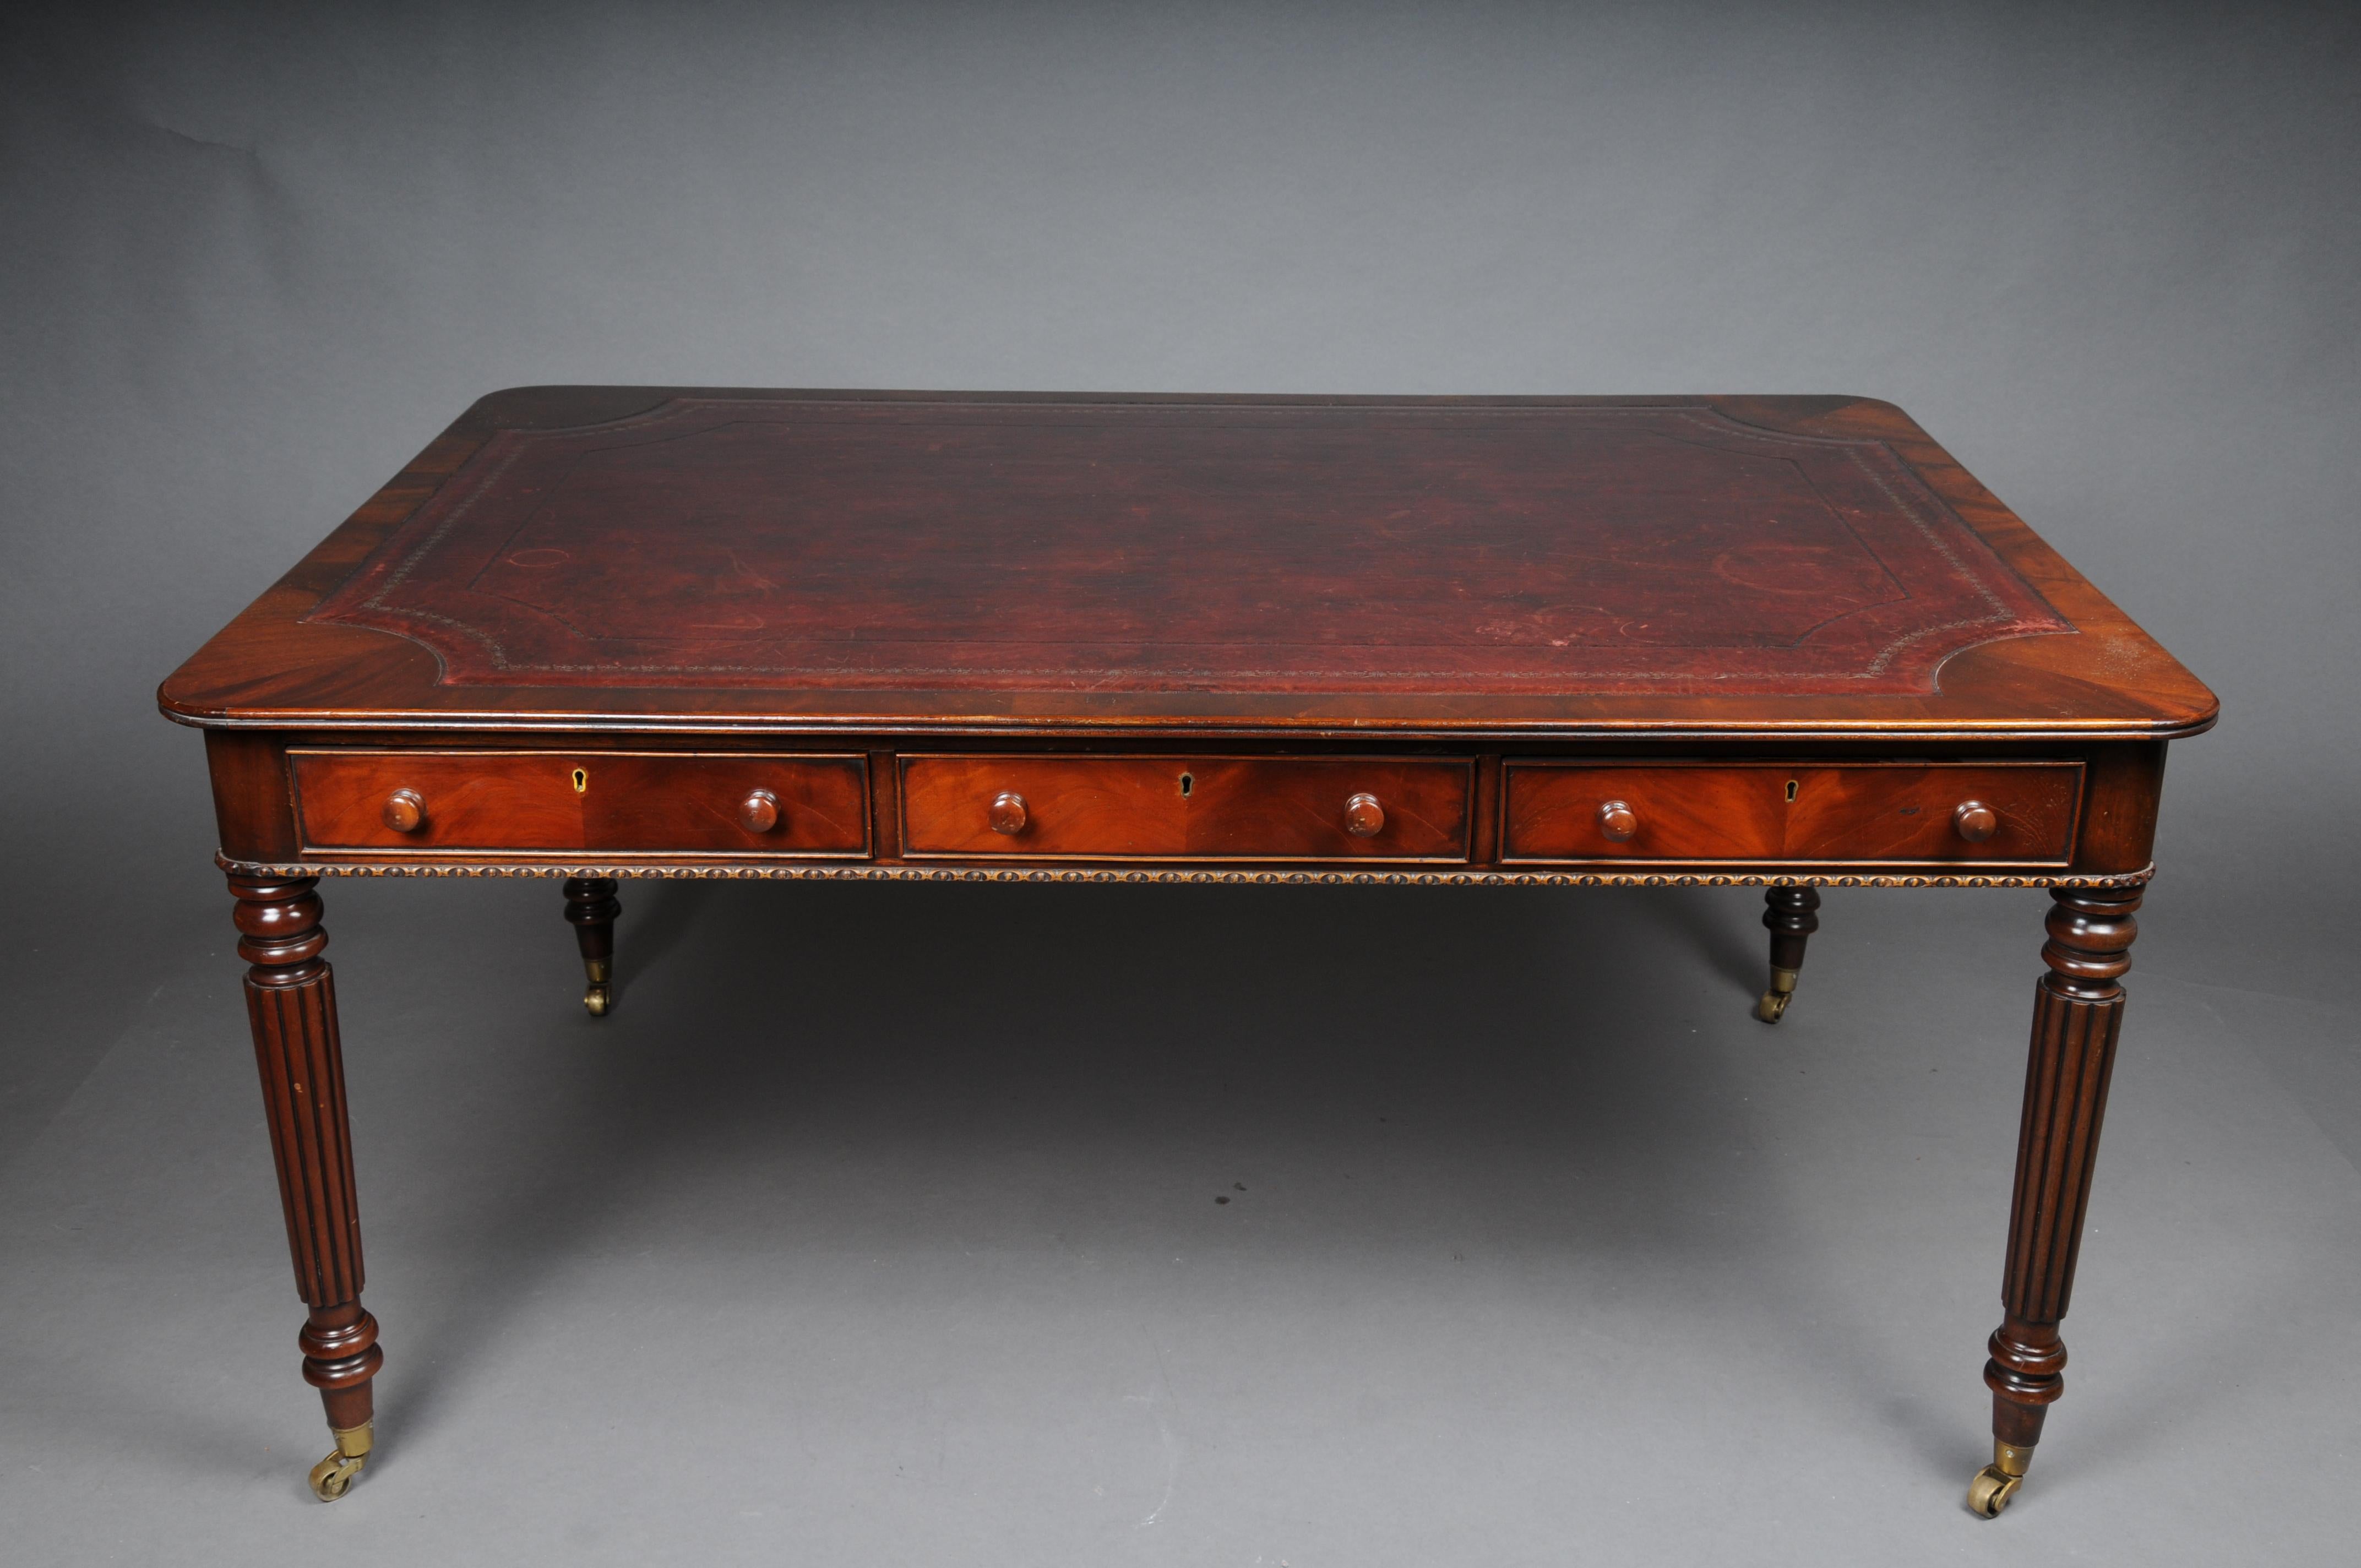 Large Victorian Partner Desk, England, 19th Century, Mahogany with Leather

England, 19th century. Mahogany. Rectangular writing tablet with rounded corners and embossed leather cover. Six frame drawers with double knob handles and lockable drawers.